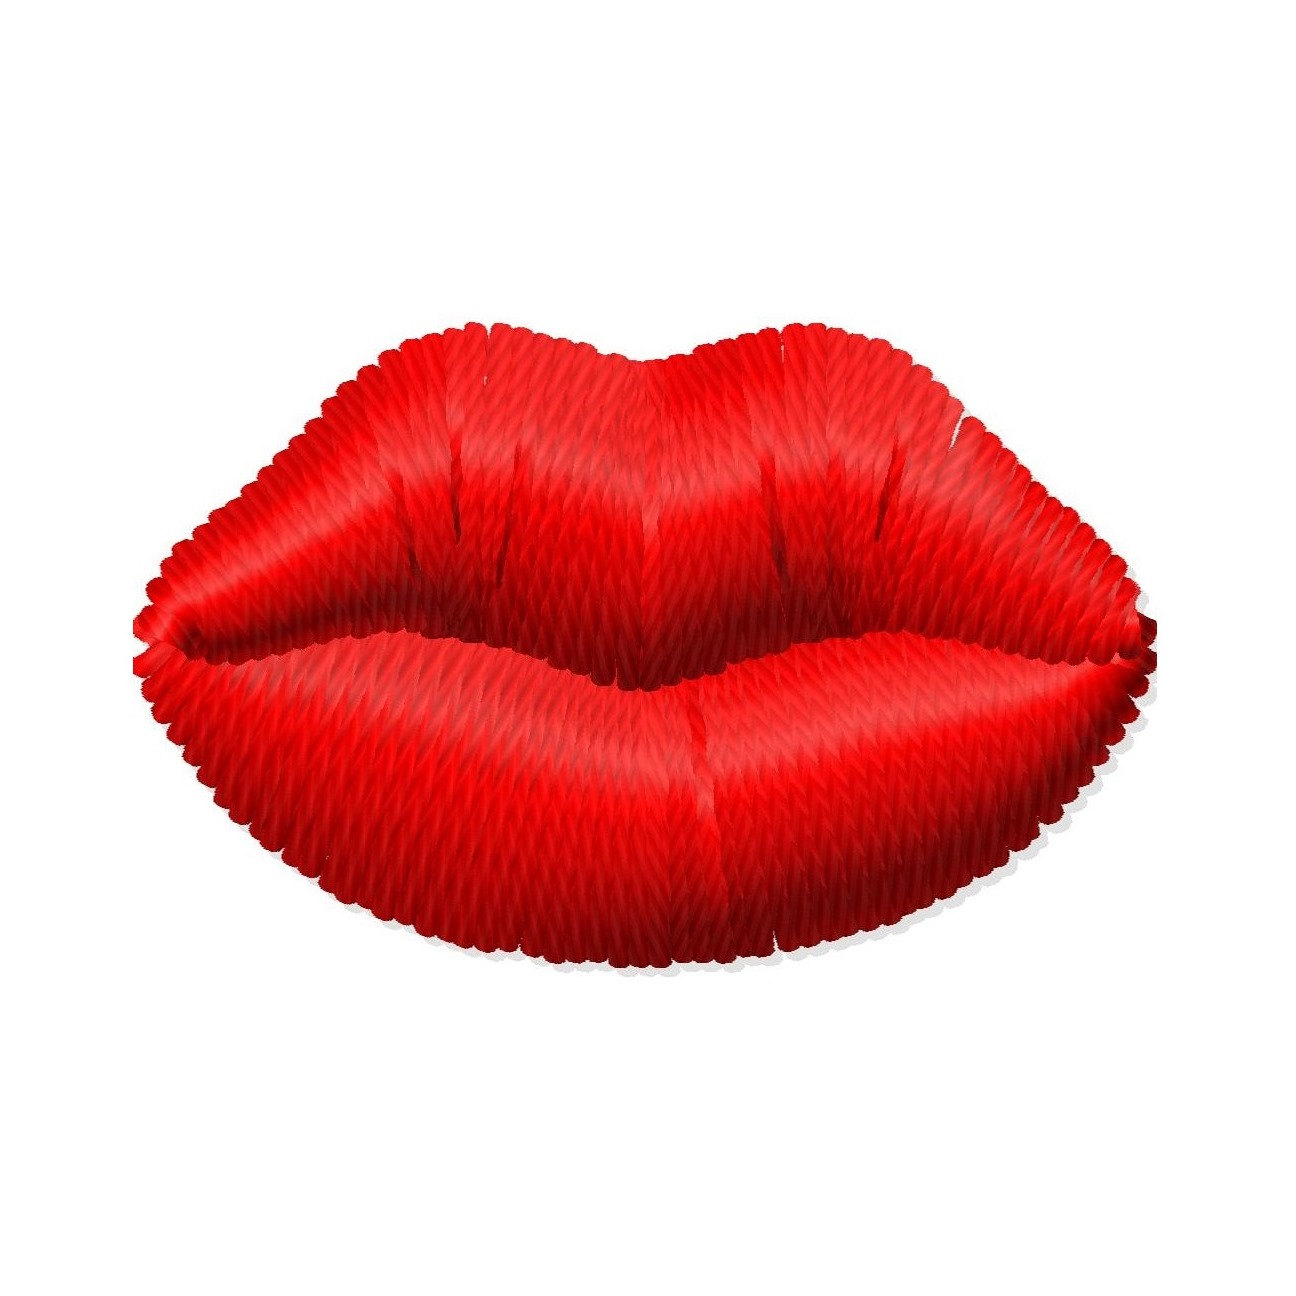 Free vector lips clipart image